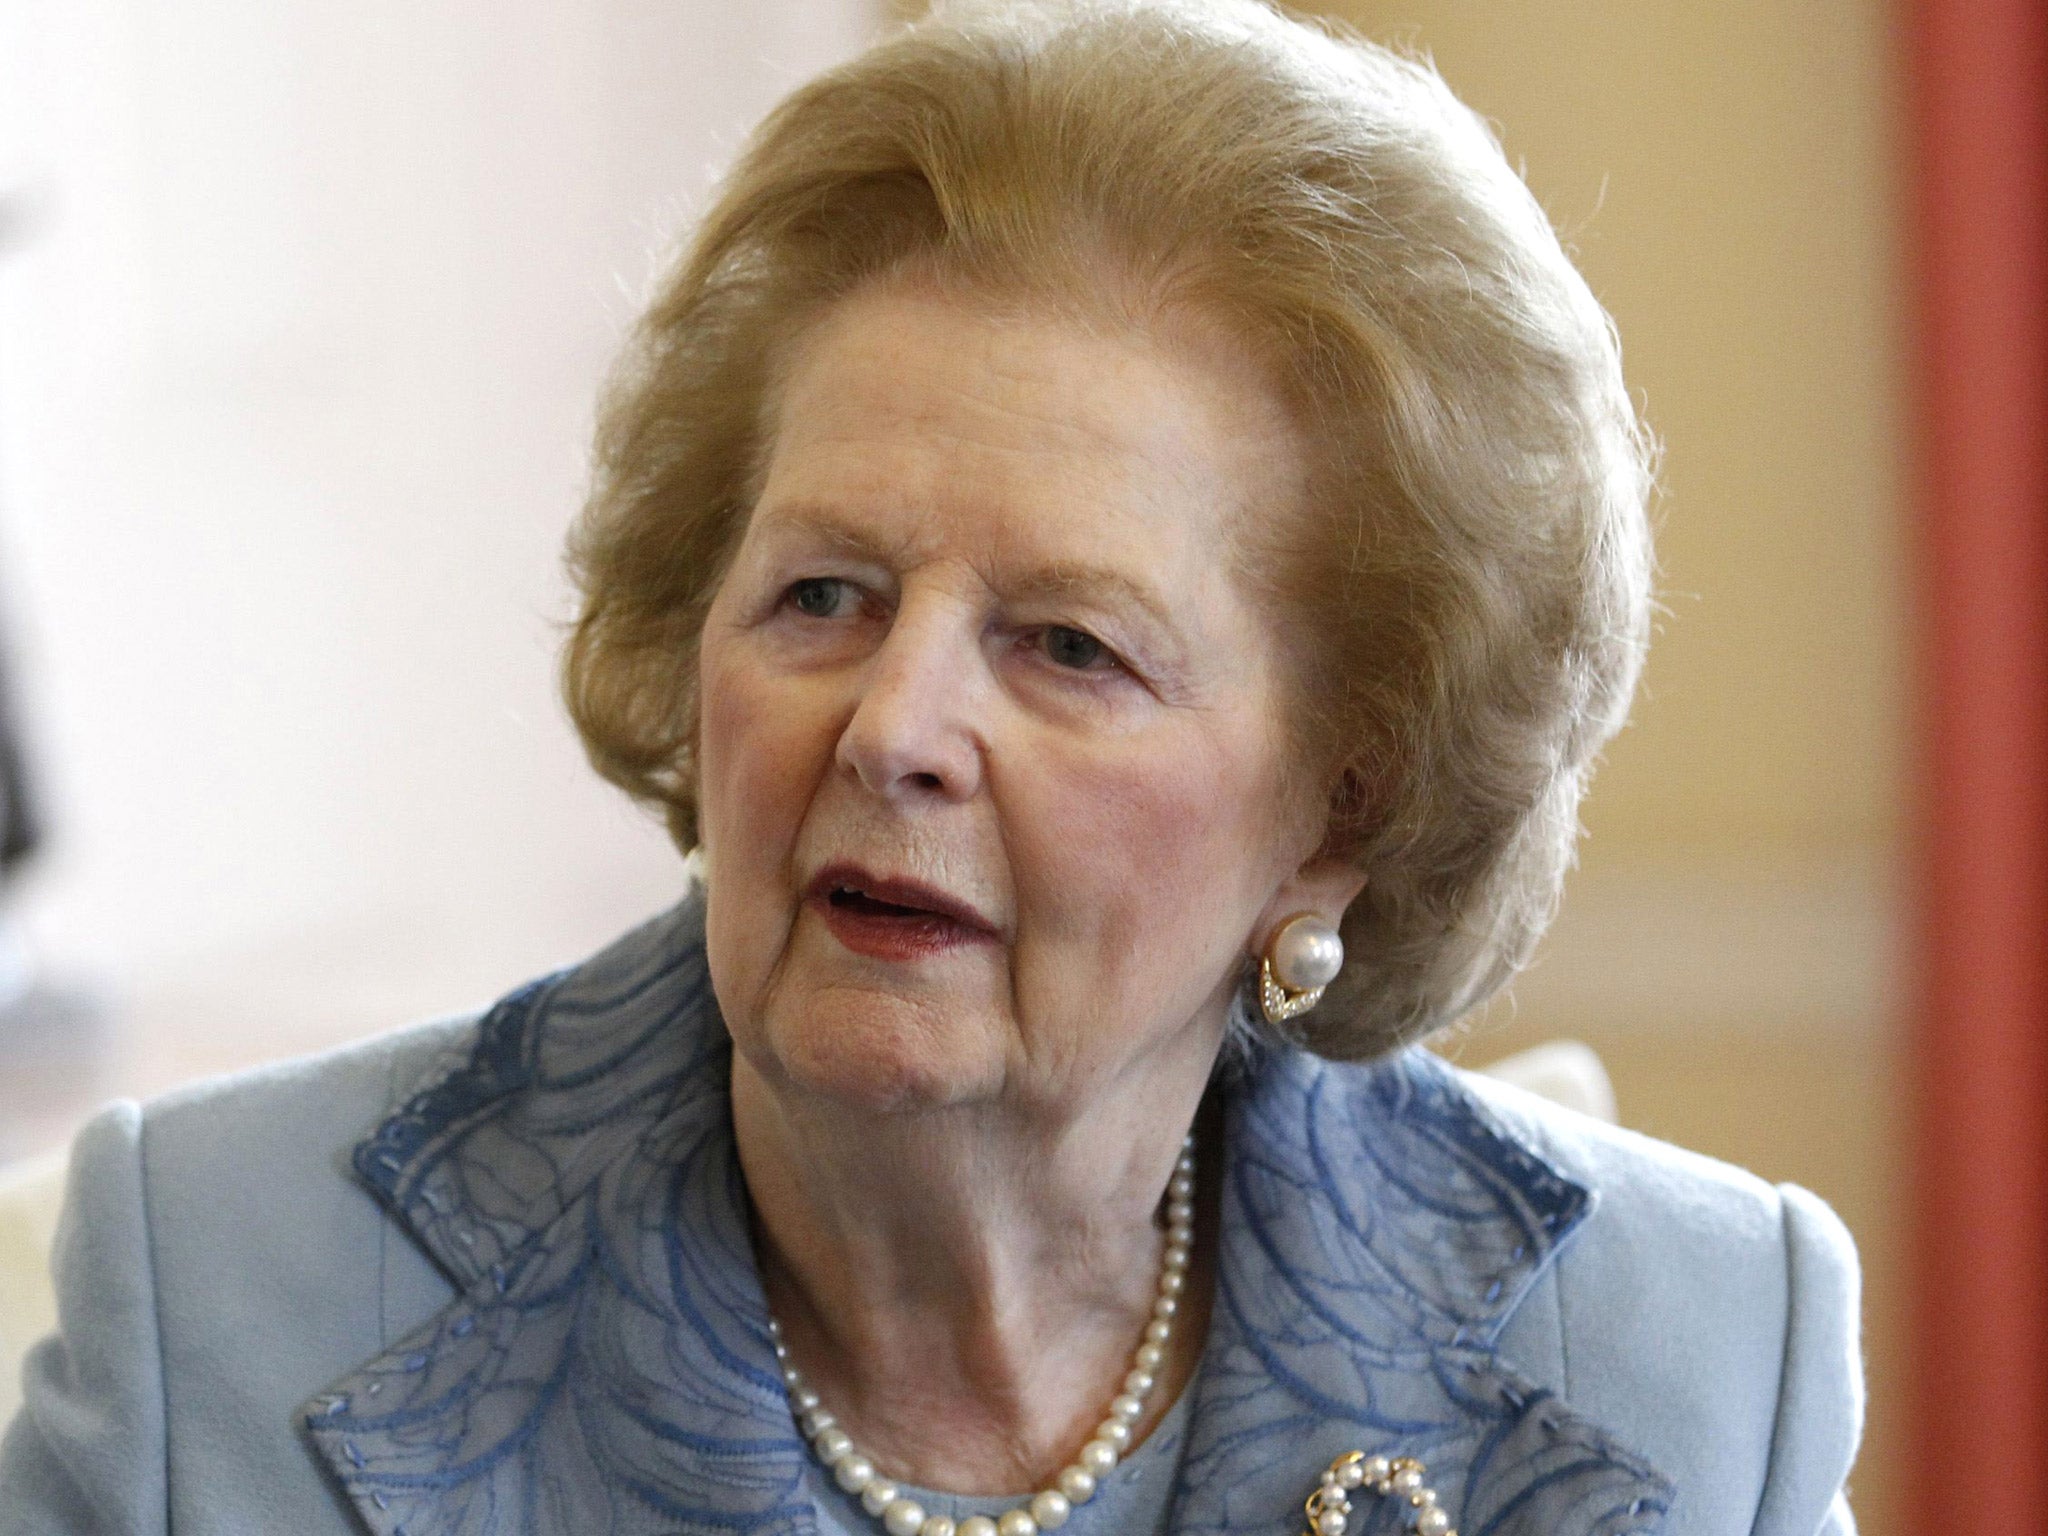 The direct costs for Baroness Thatcher's funeral were about £1.2 million